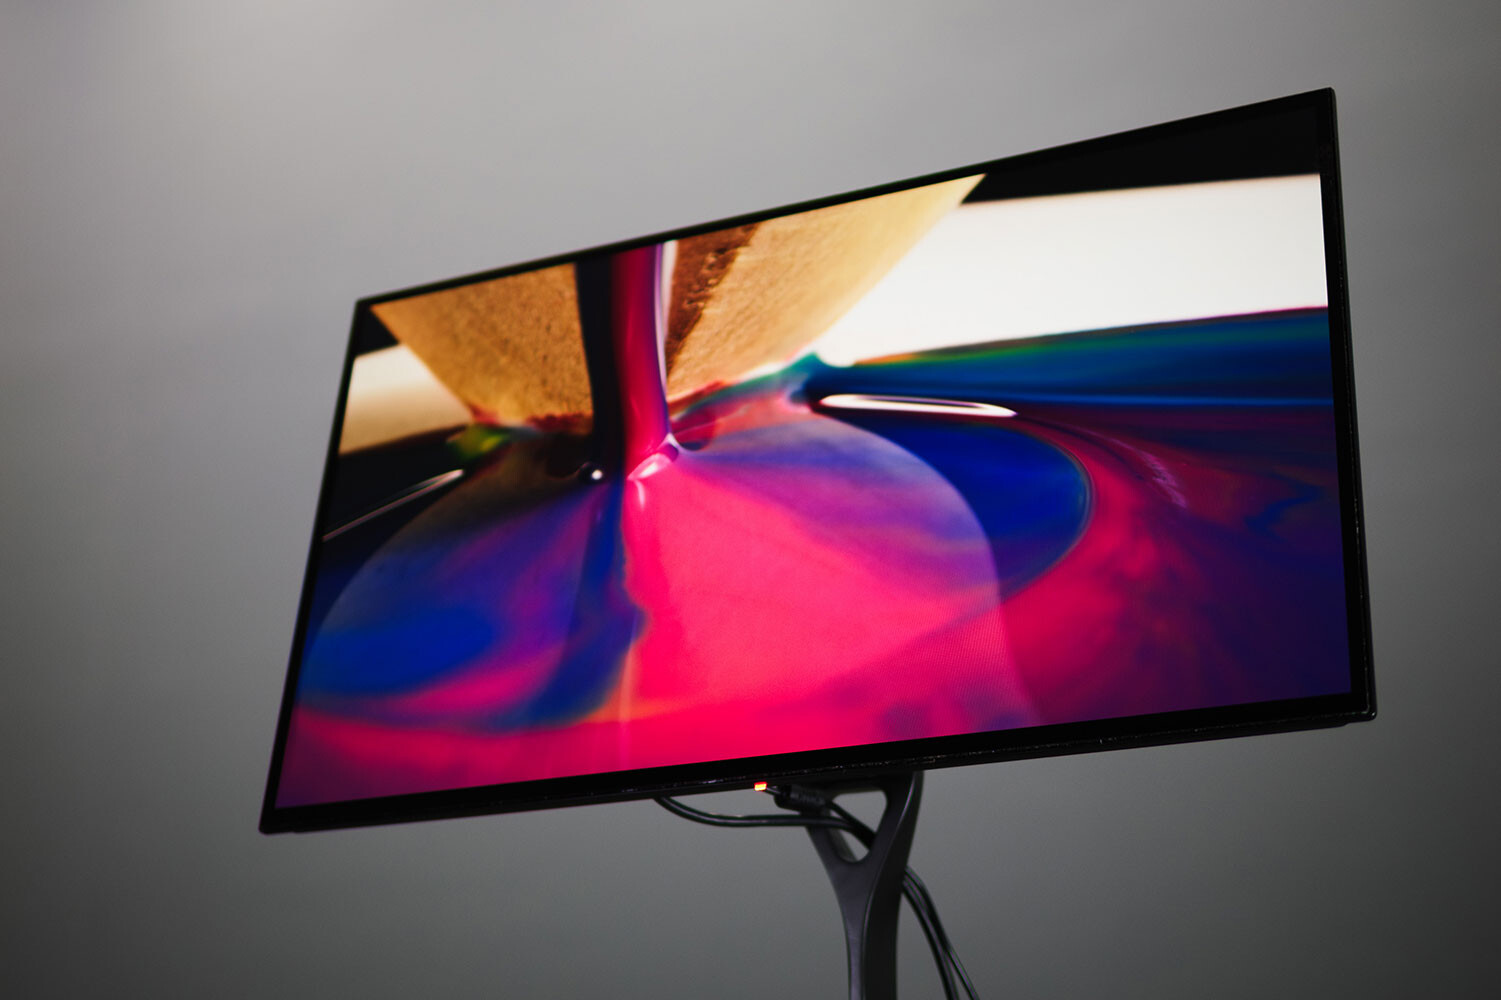 Eve Announces World First — IPS 1440p 240 Hz Gaming Monitor